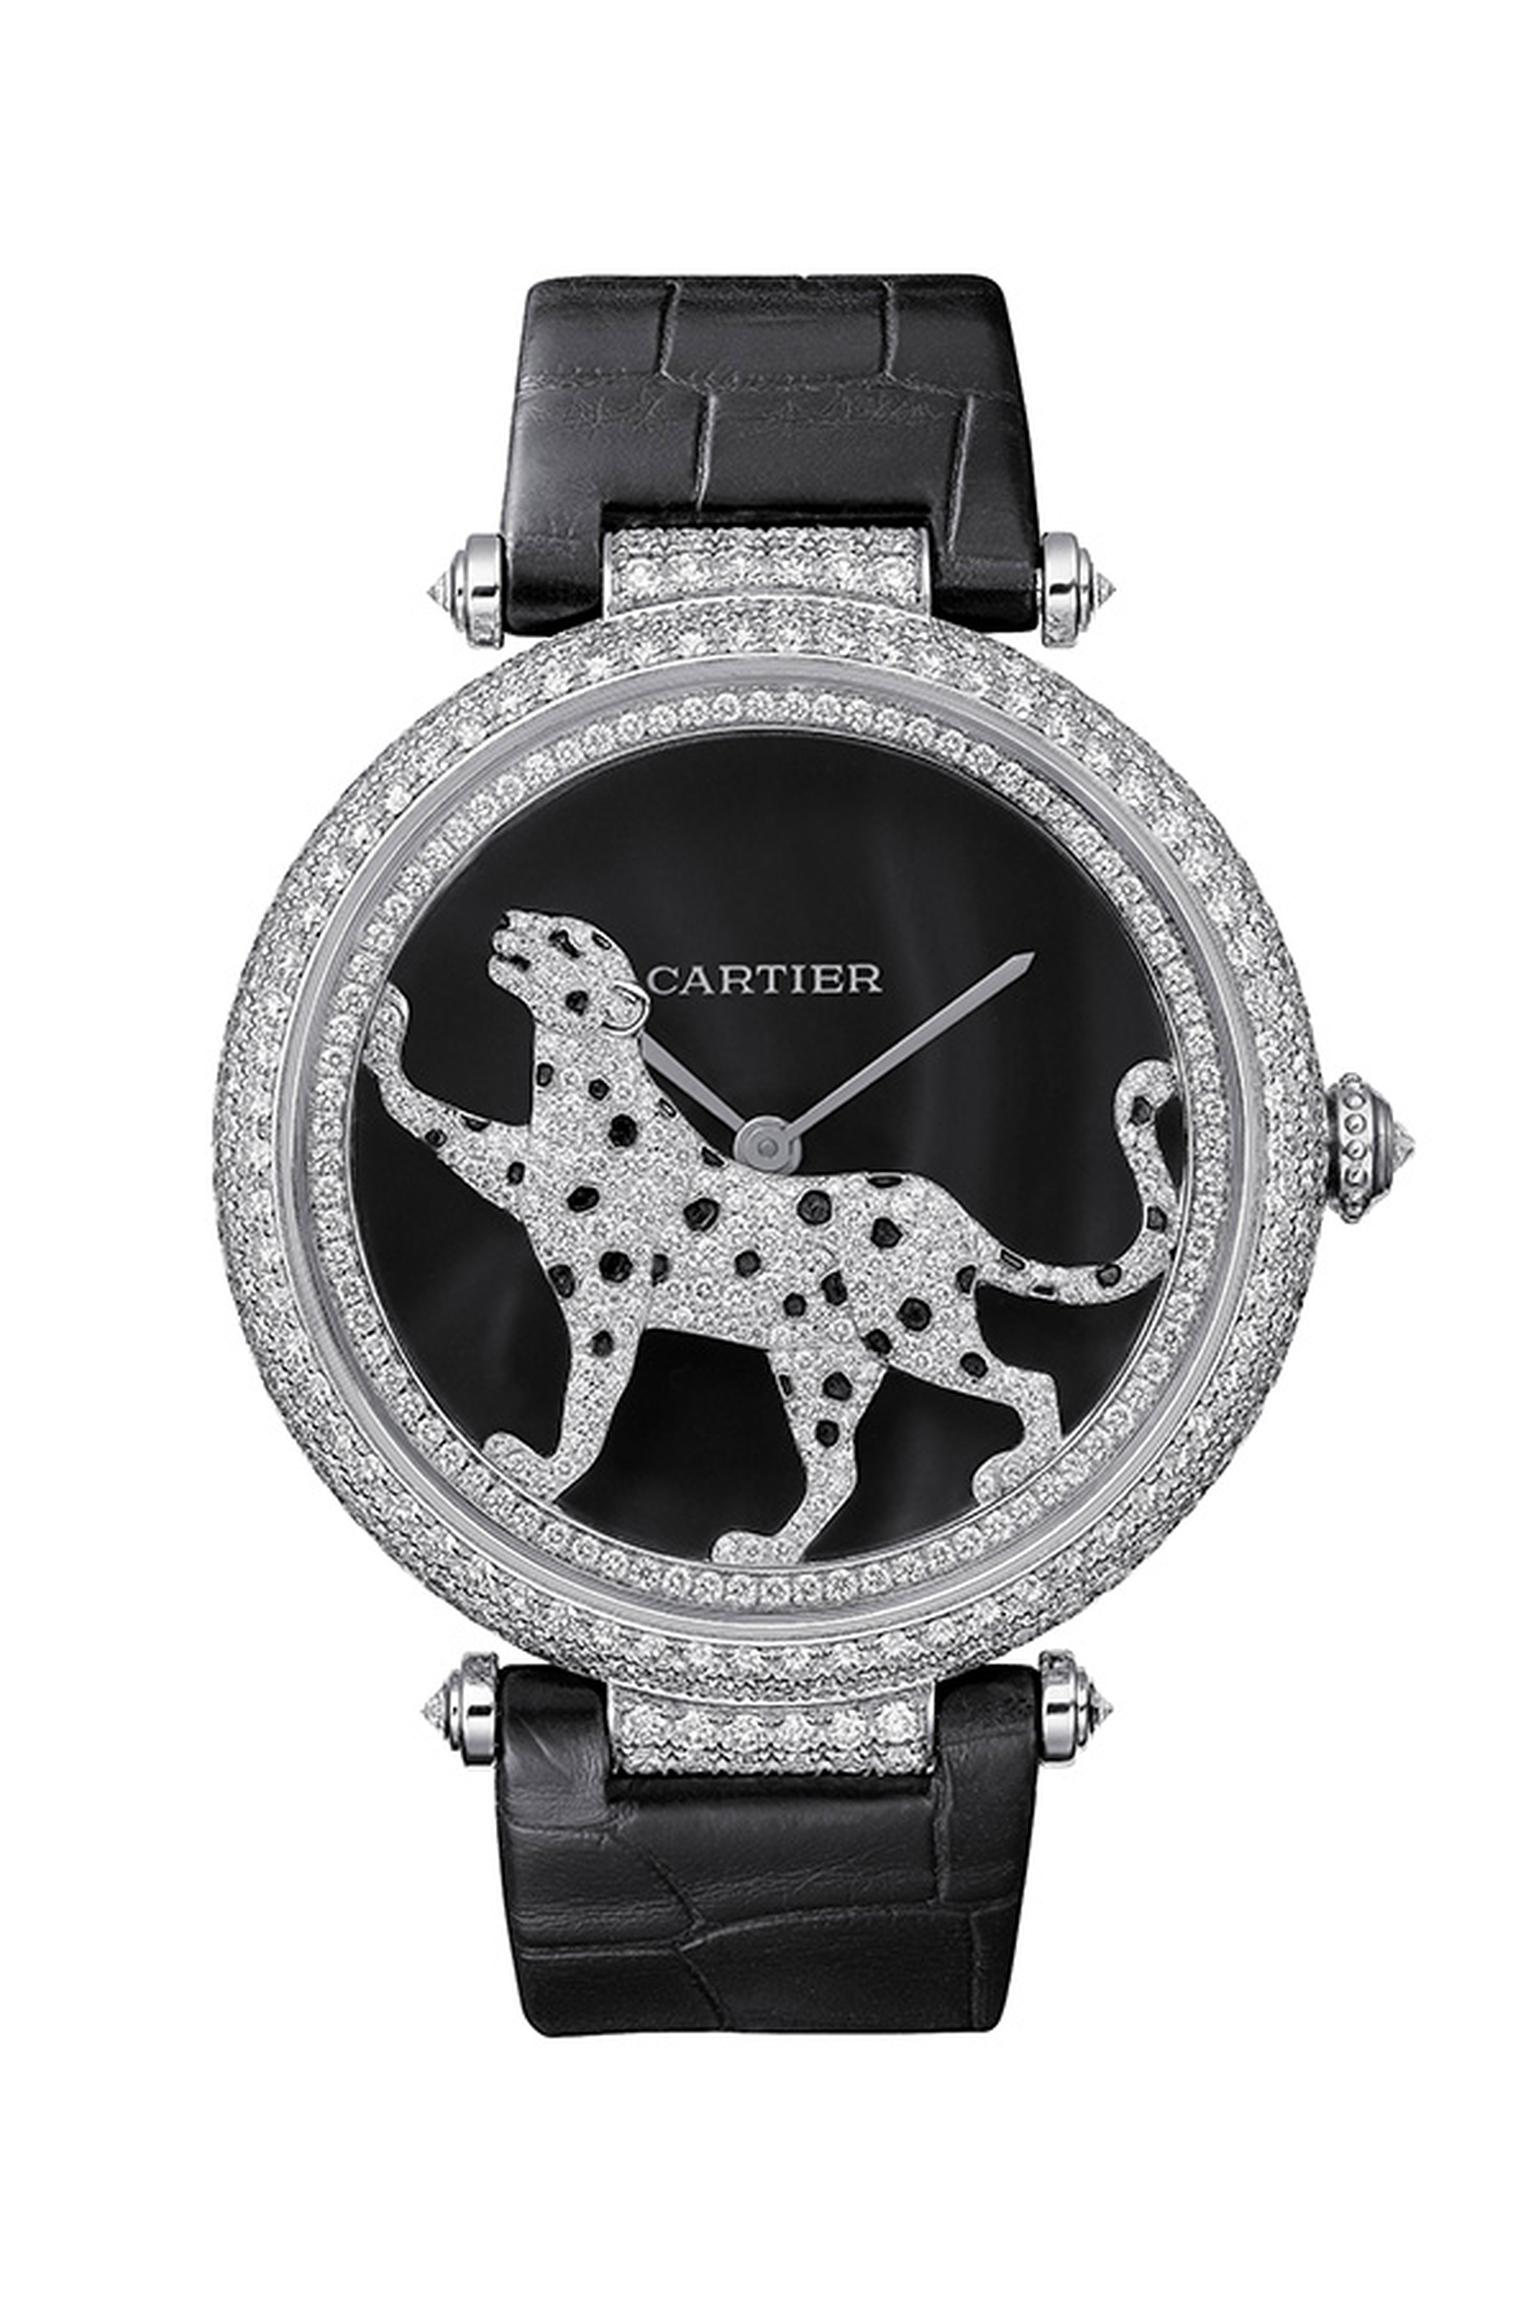 SIHH 2012 Cartier Panthere high jewellery watch